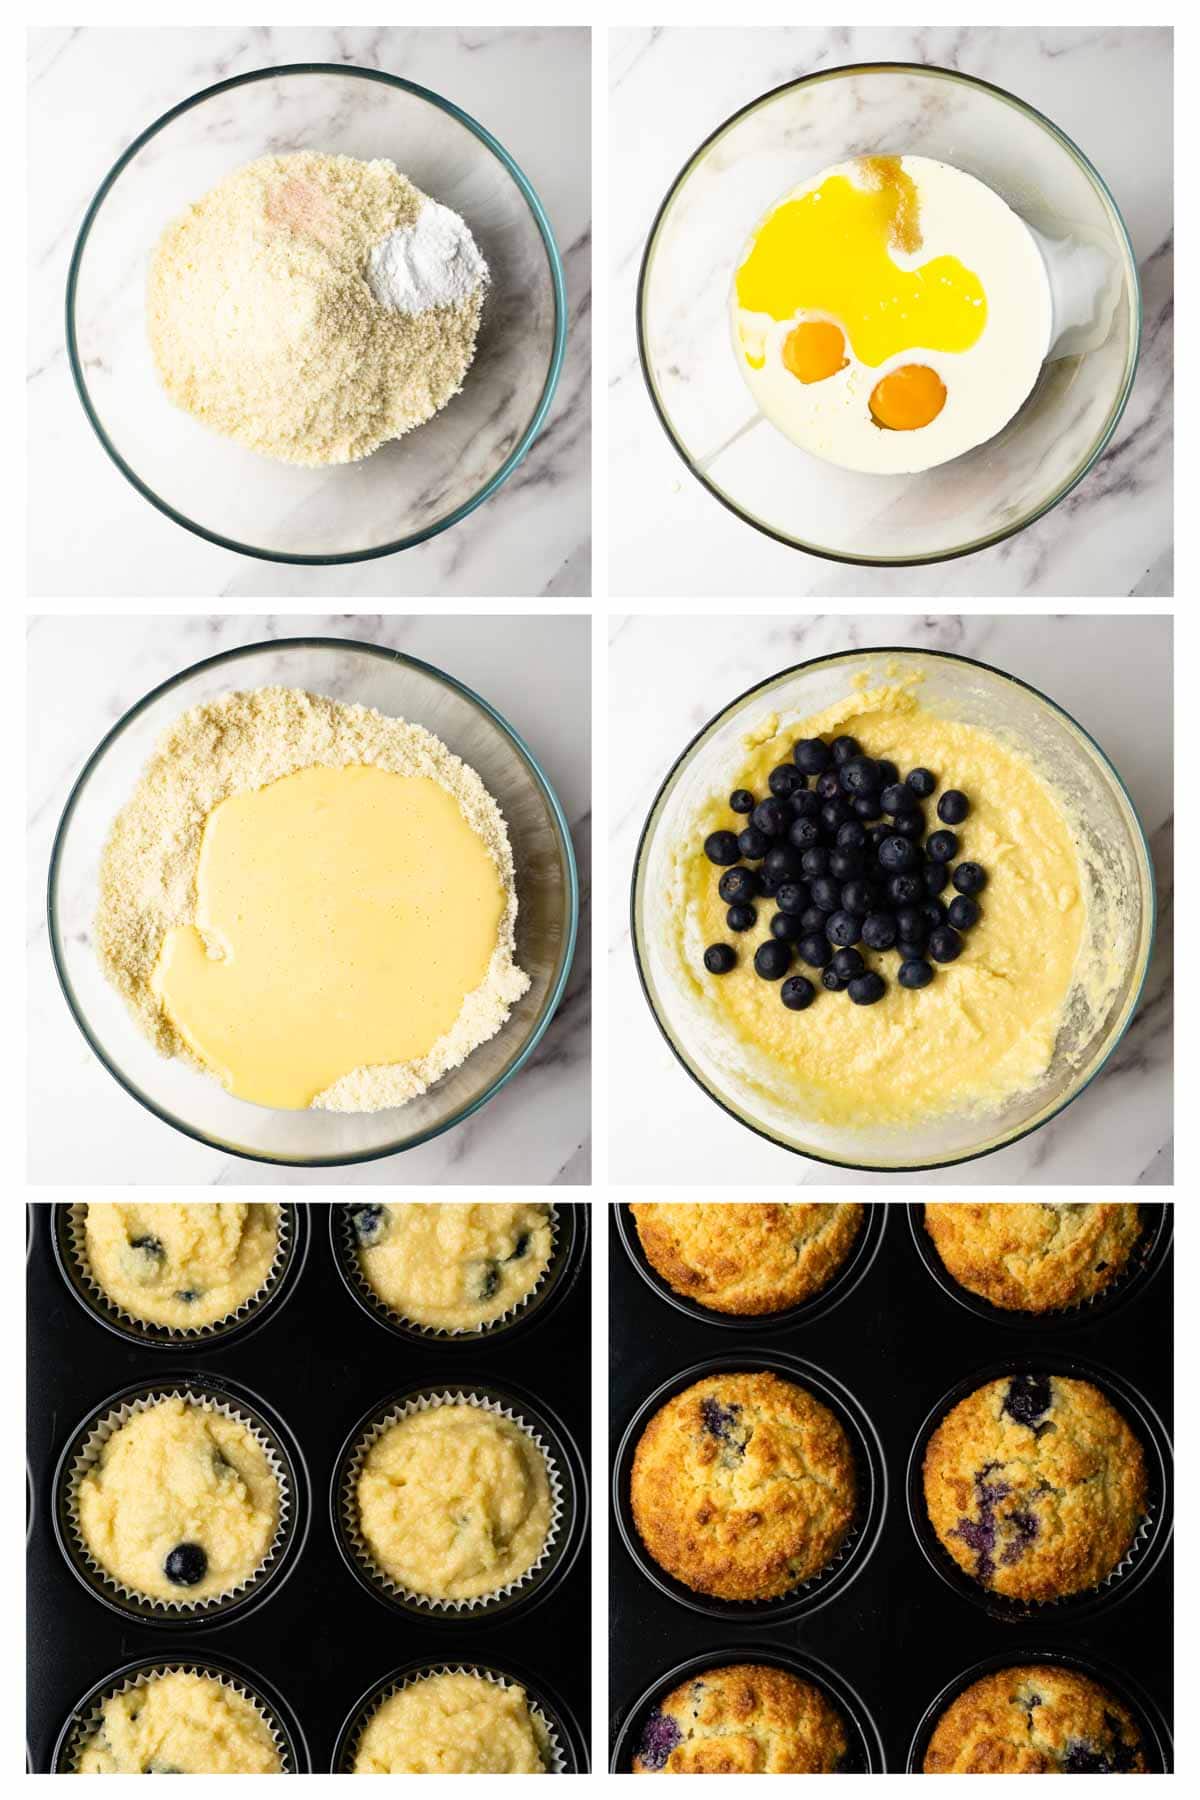 6 images showing step by step directions to make keto blueberry muffins.